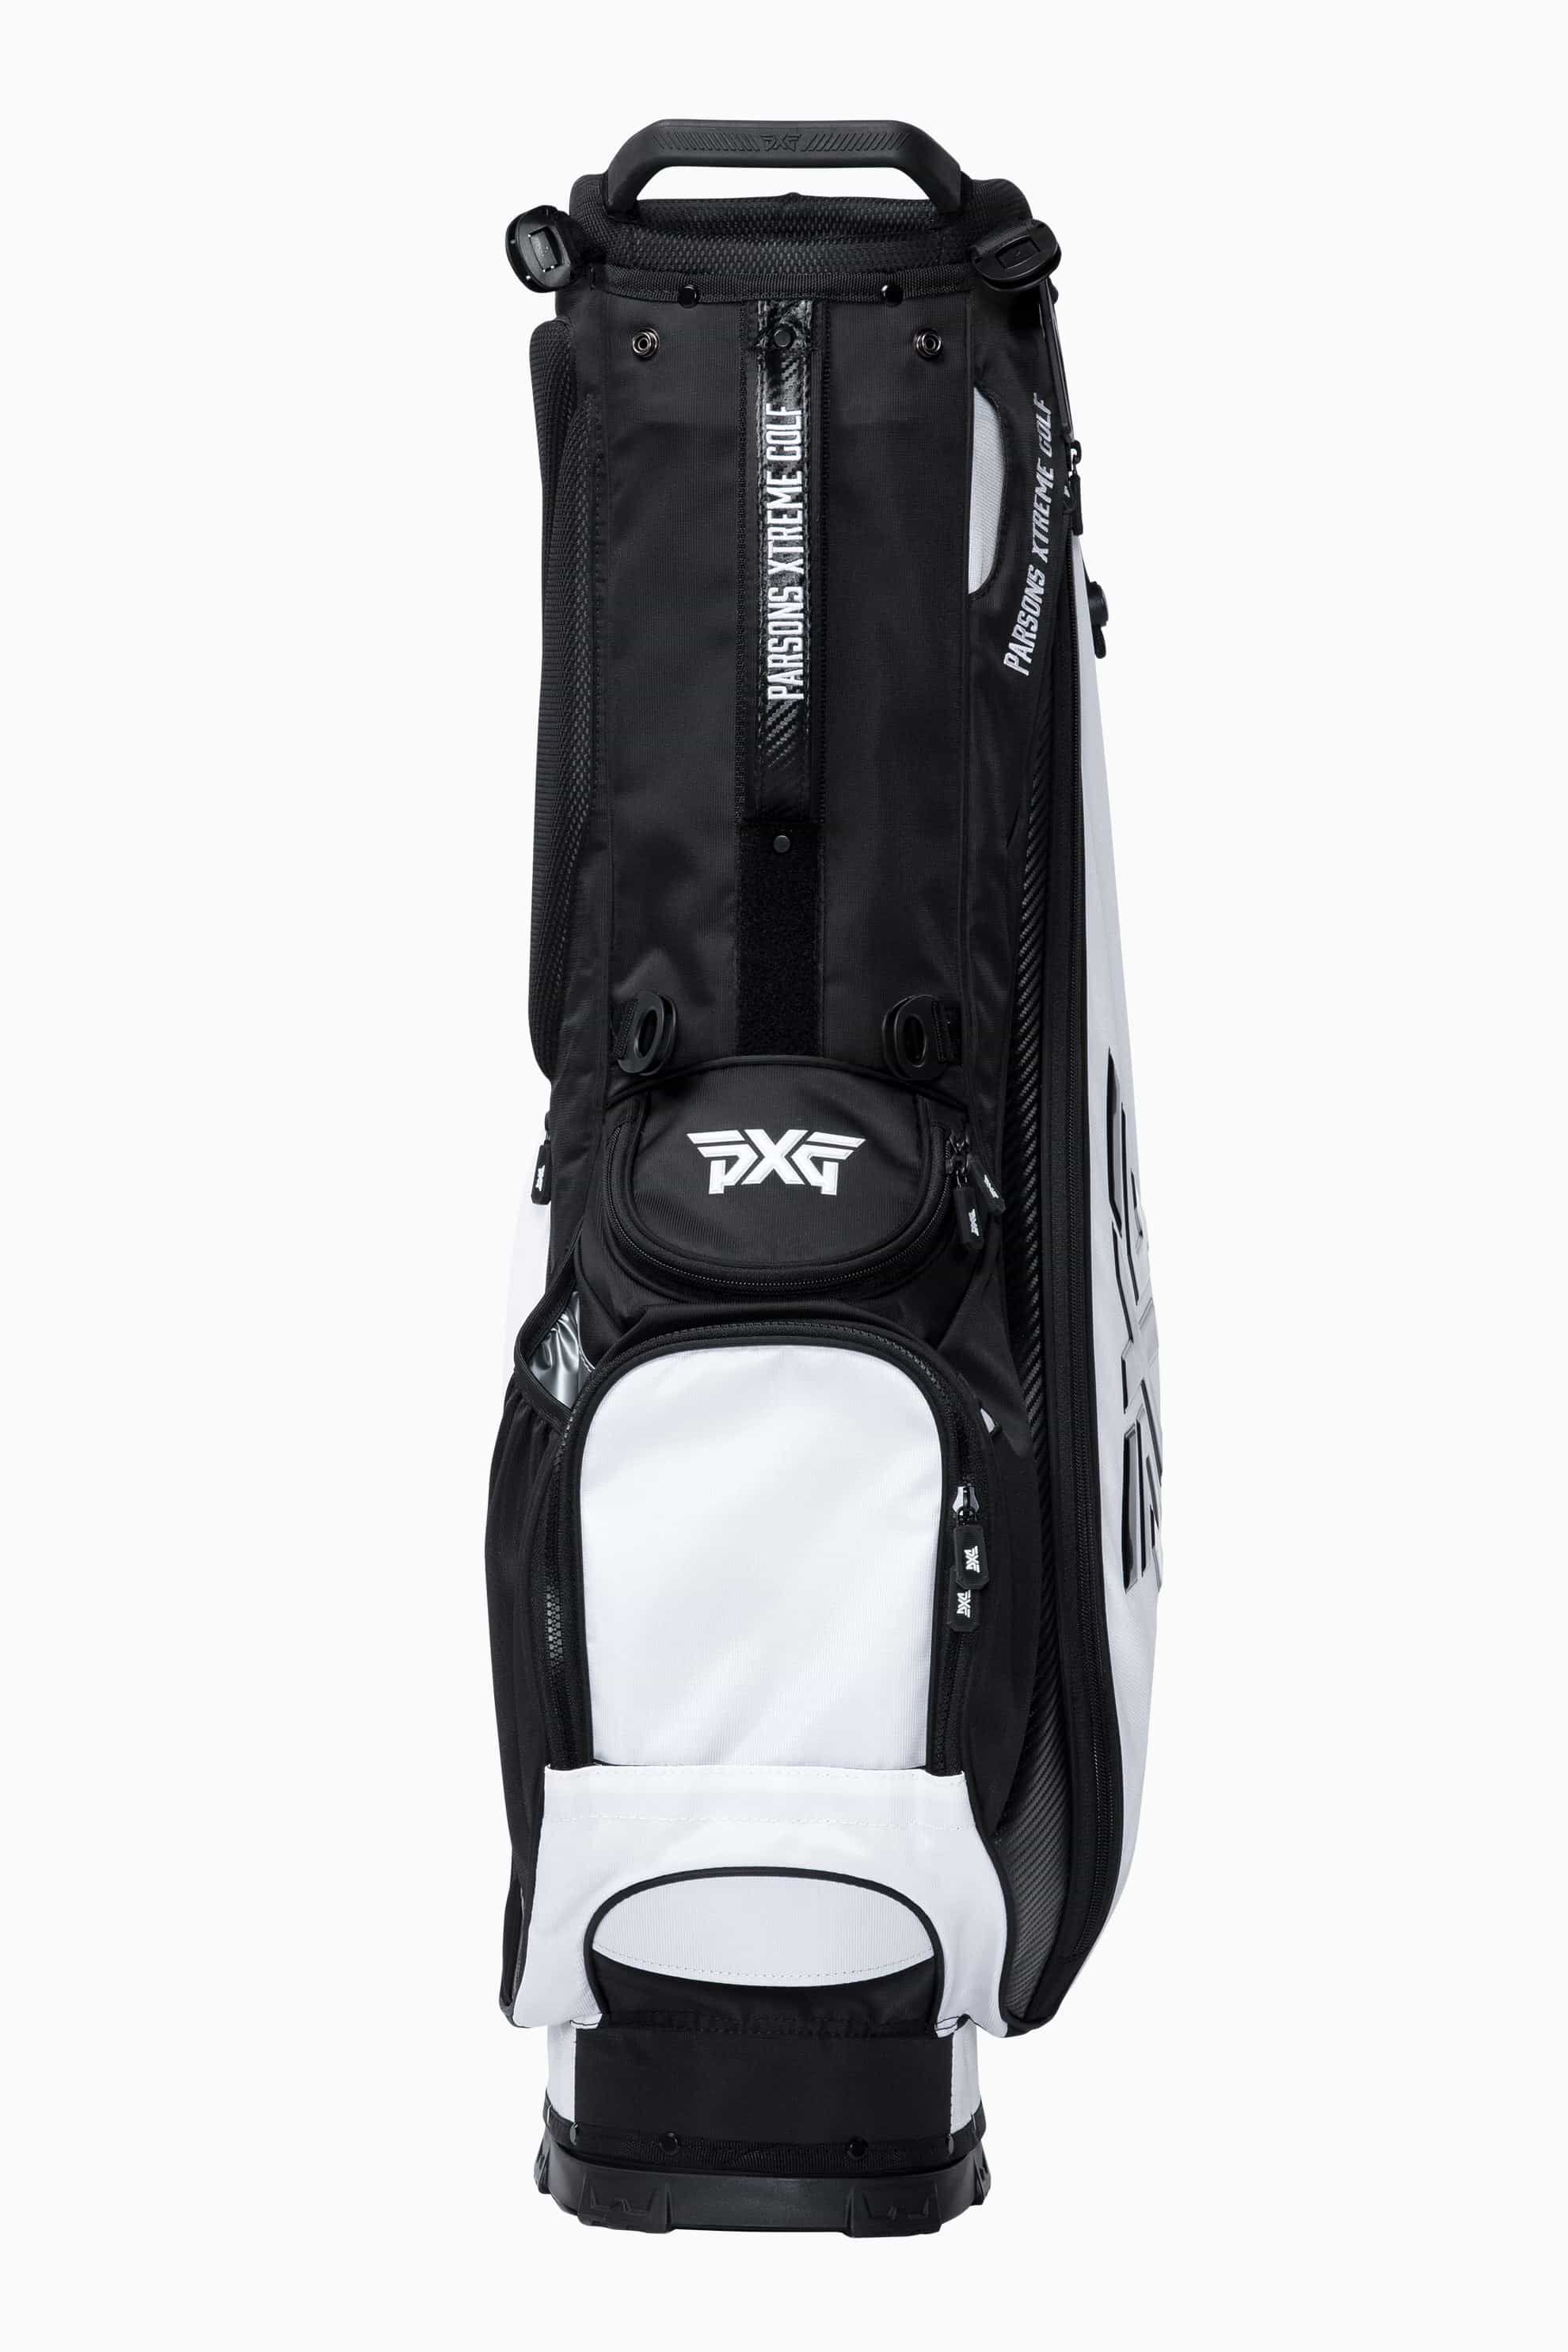 The Best Stand Bags and Carry Golf Bags  Sun Mountain  SunMountainSports